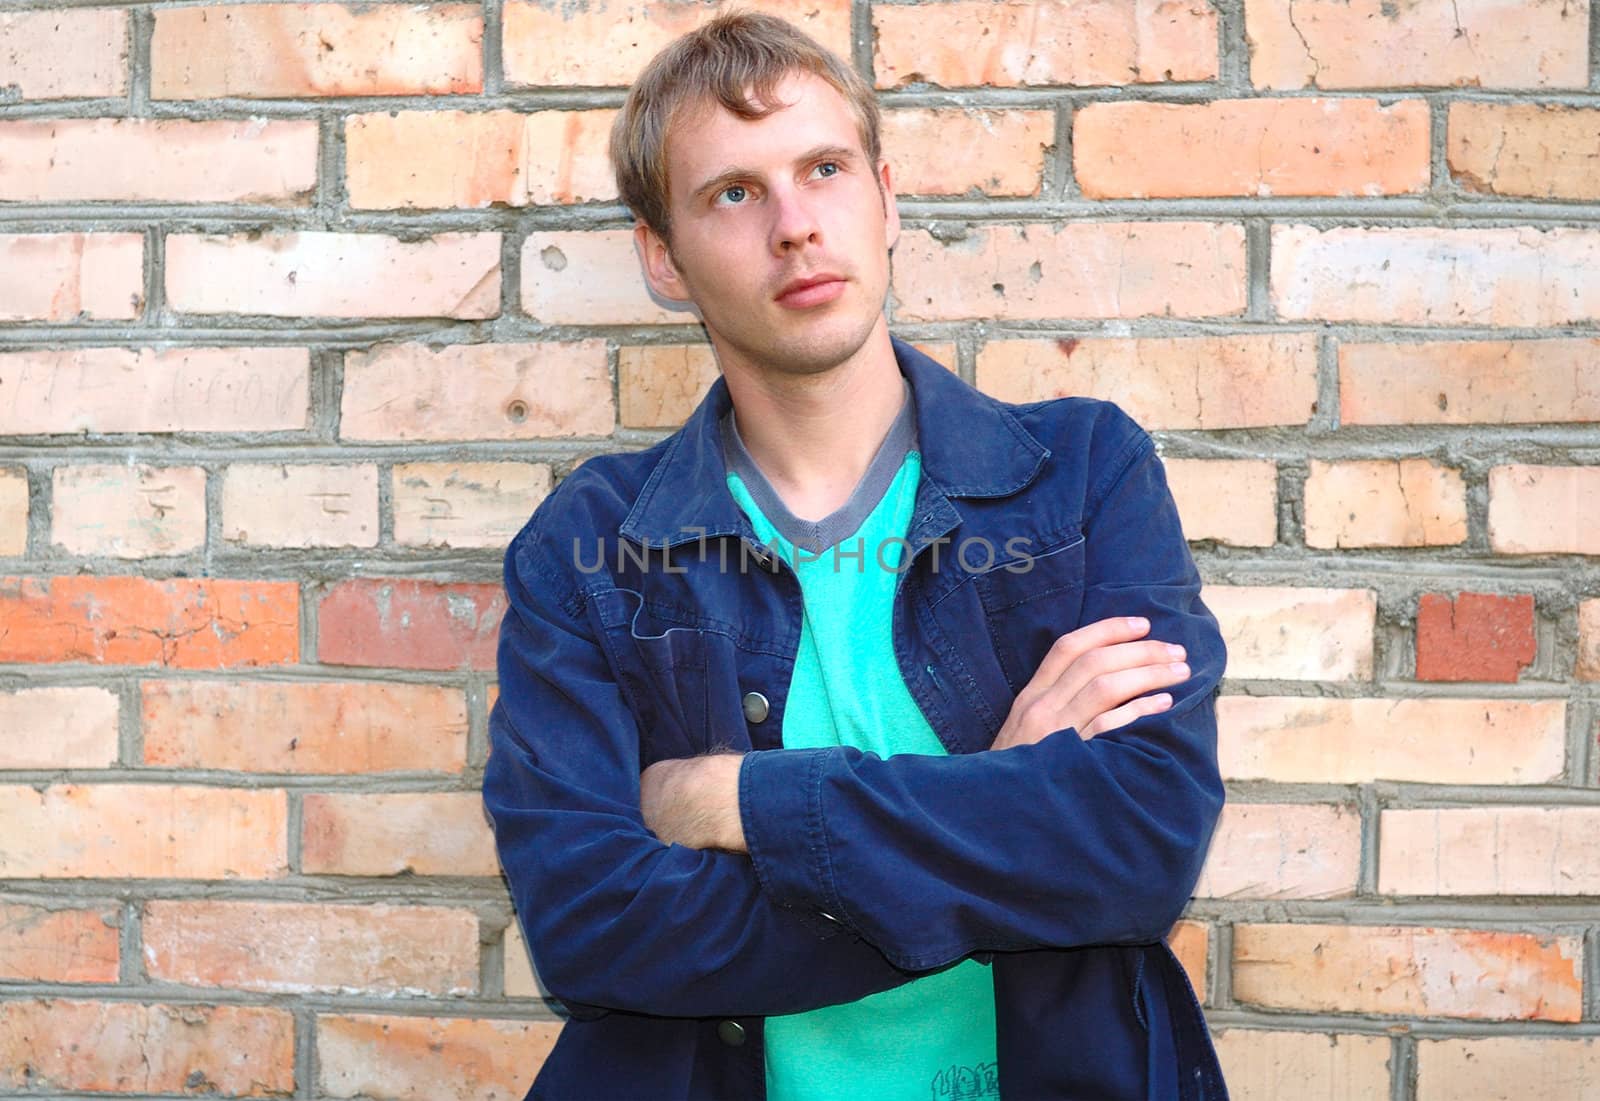 Young stylish man with blonde hair stand near brick wall.